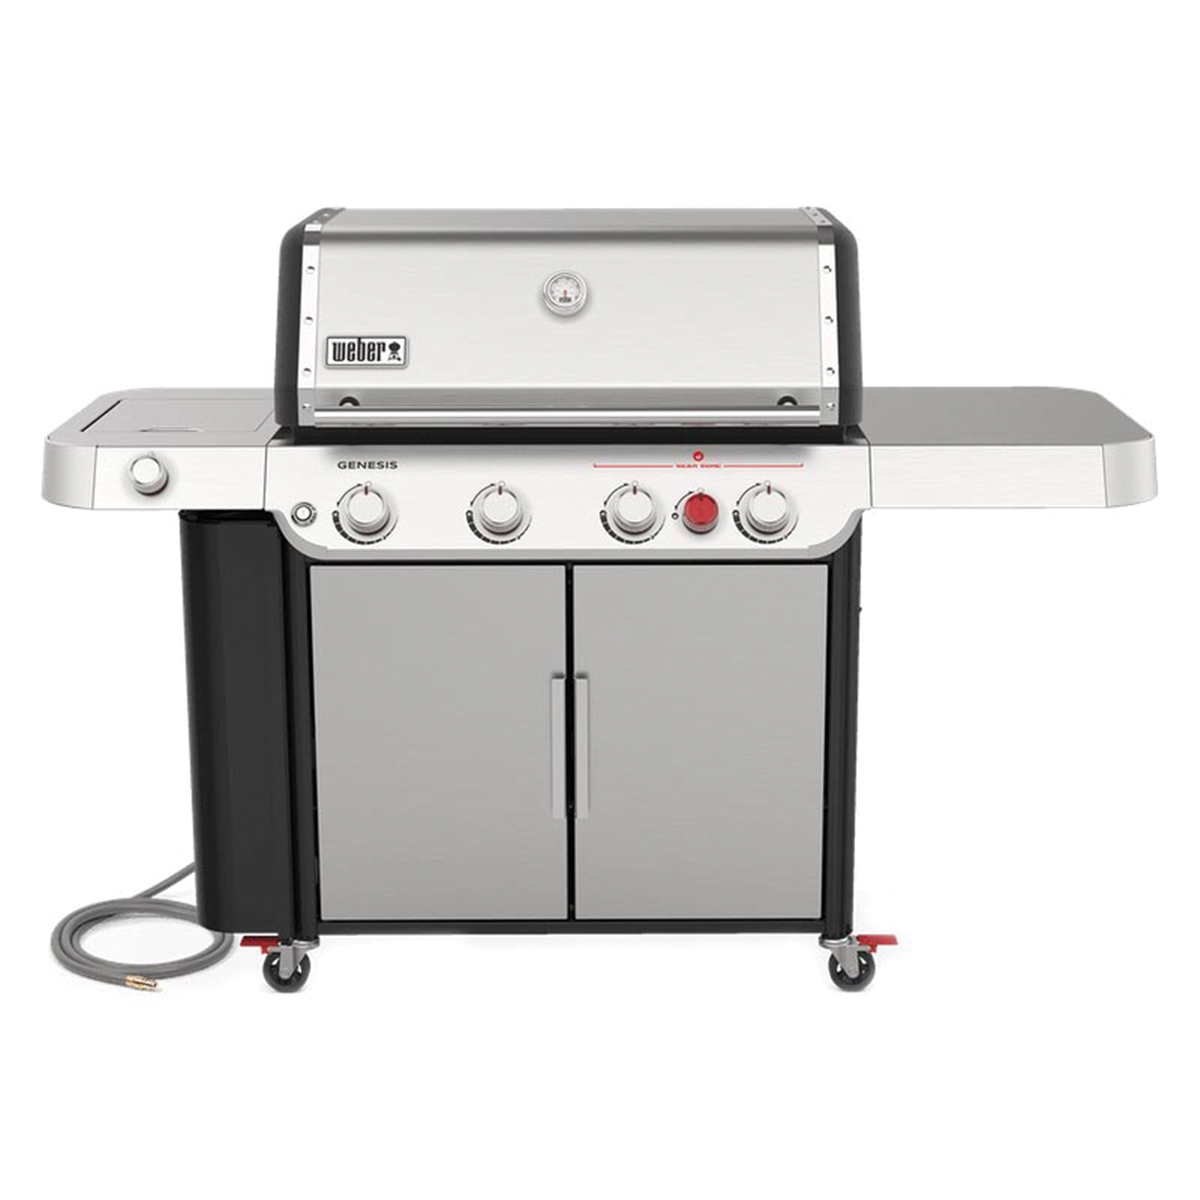 Weber GENESIS S-435 Series 38400001 Gas Grill, 48,000 Btu, Natural Gas, 4-Burner, 646 sq-in Primary Cooking Surface